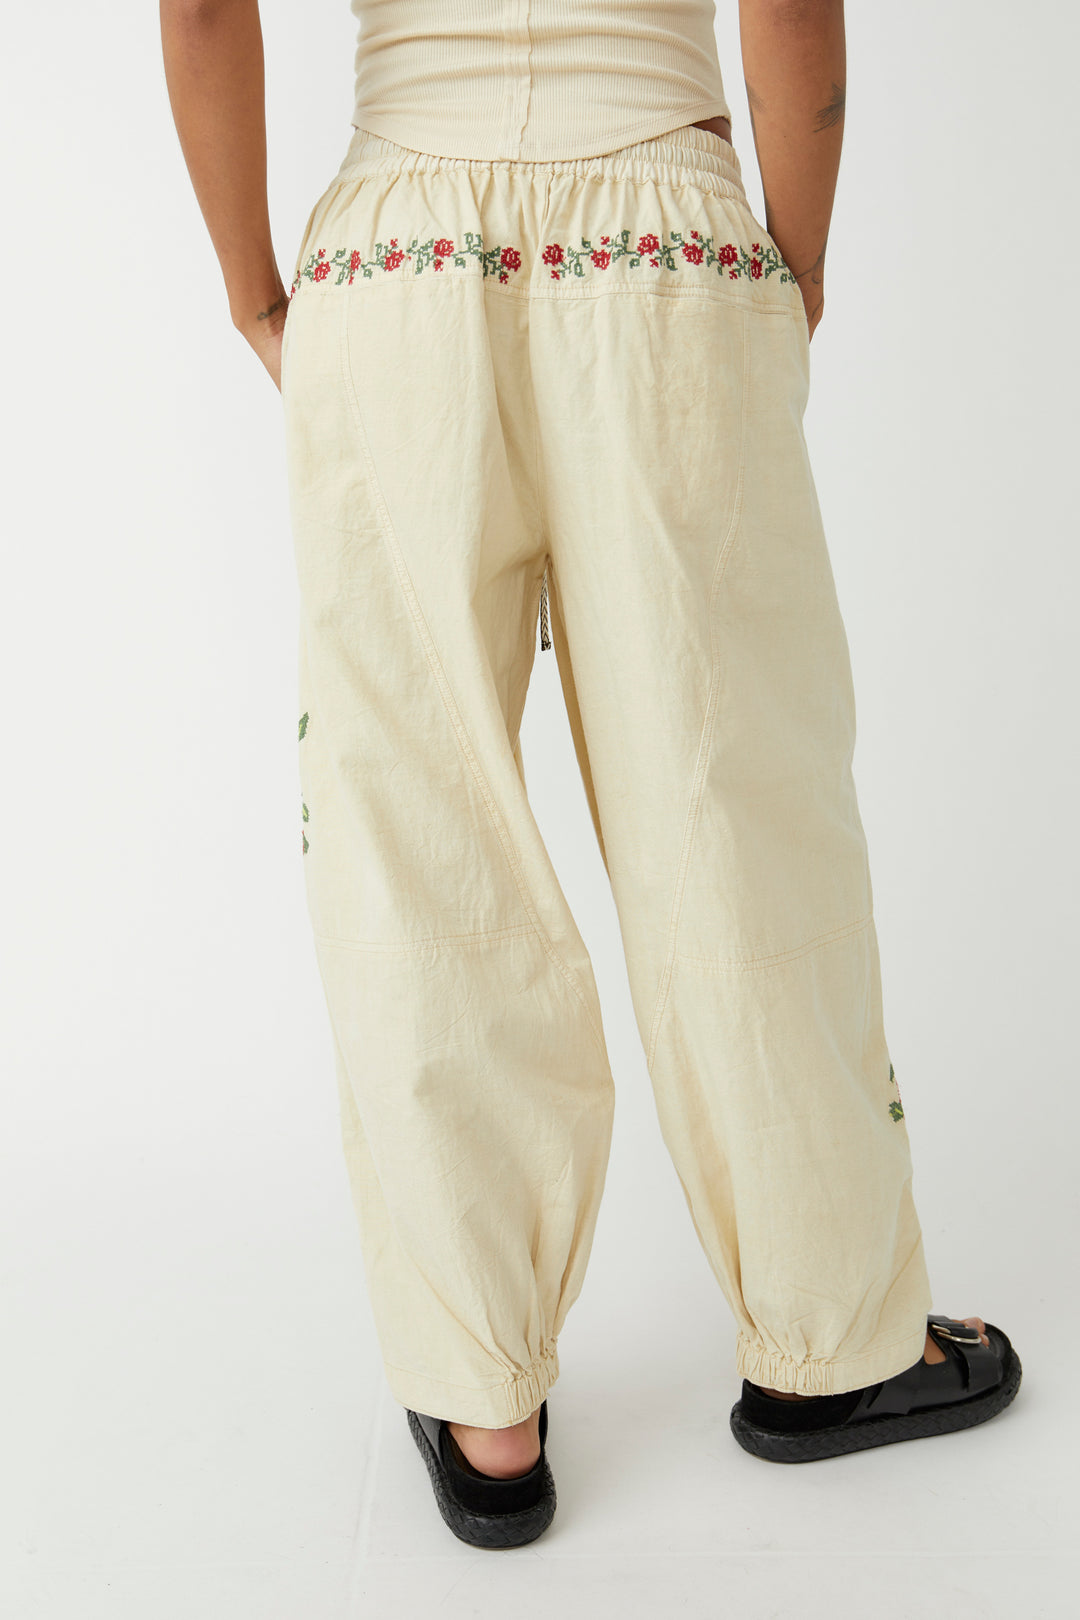 ROSALIA EMBROIDERED PULL PANT-BIRCH COMBO - Kingfisher Road - Online Boutique